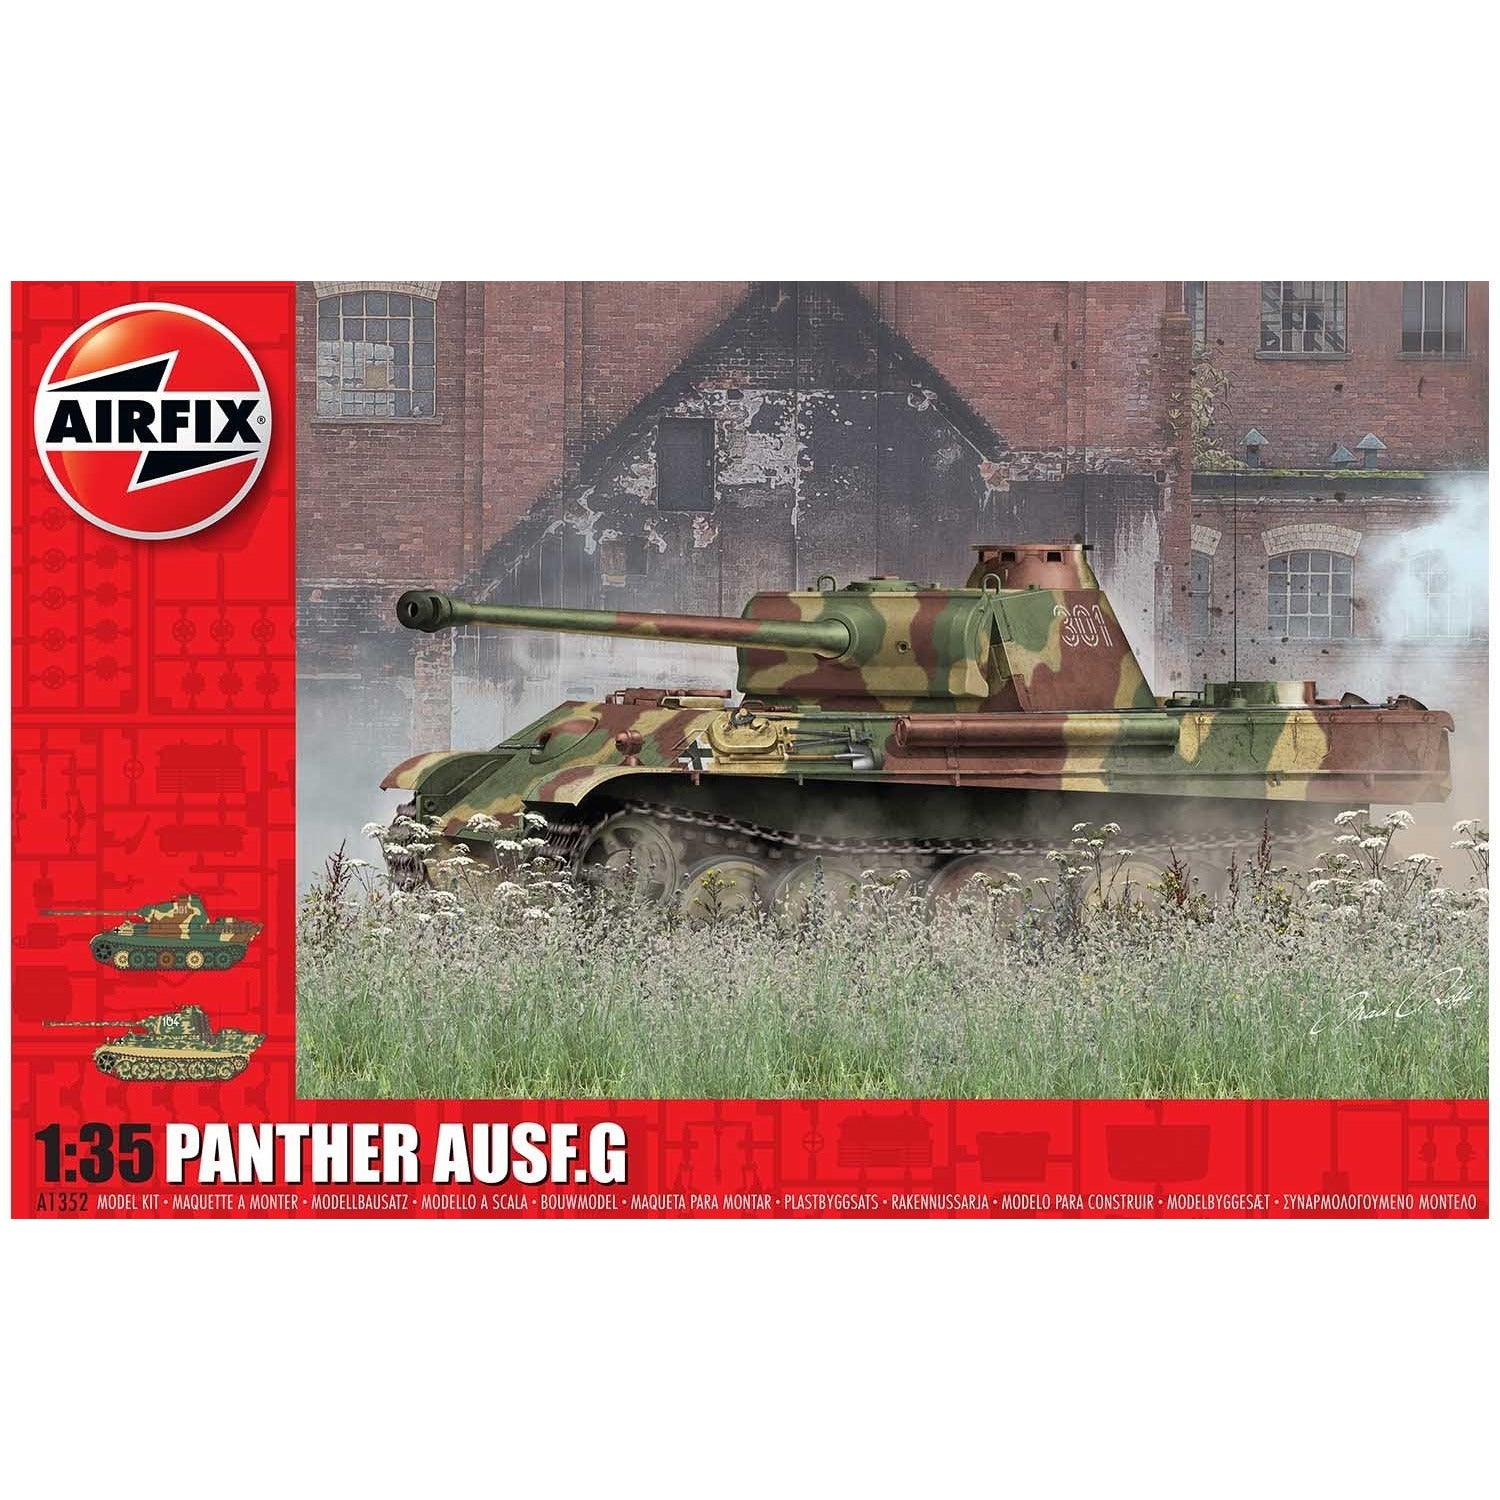 Panther Asf. G 1/35 #01352 by Airfix